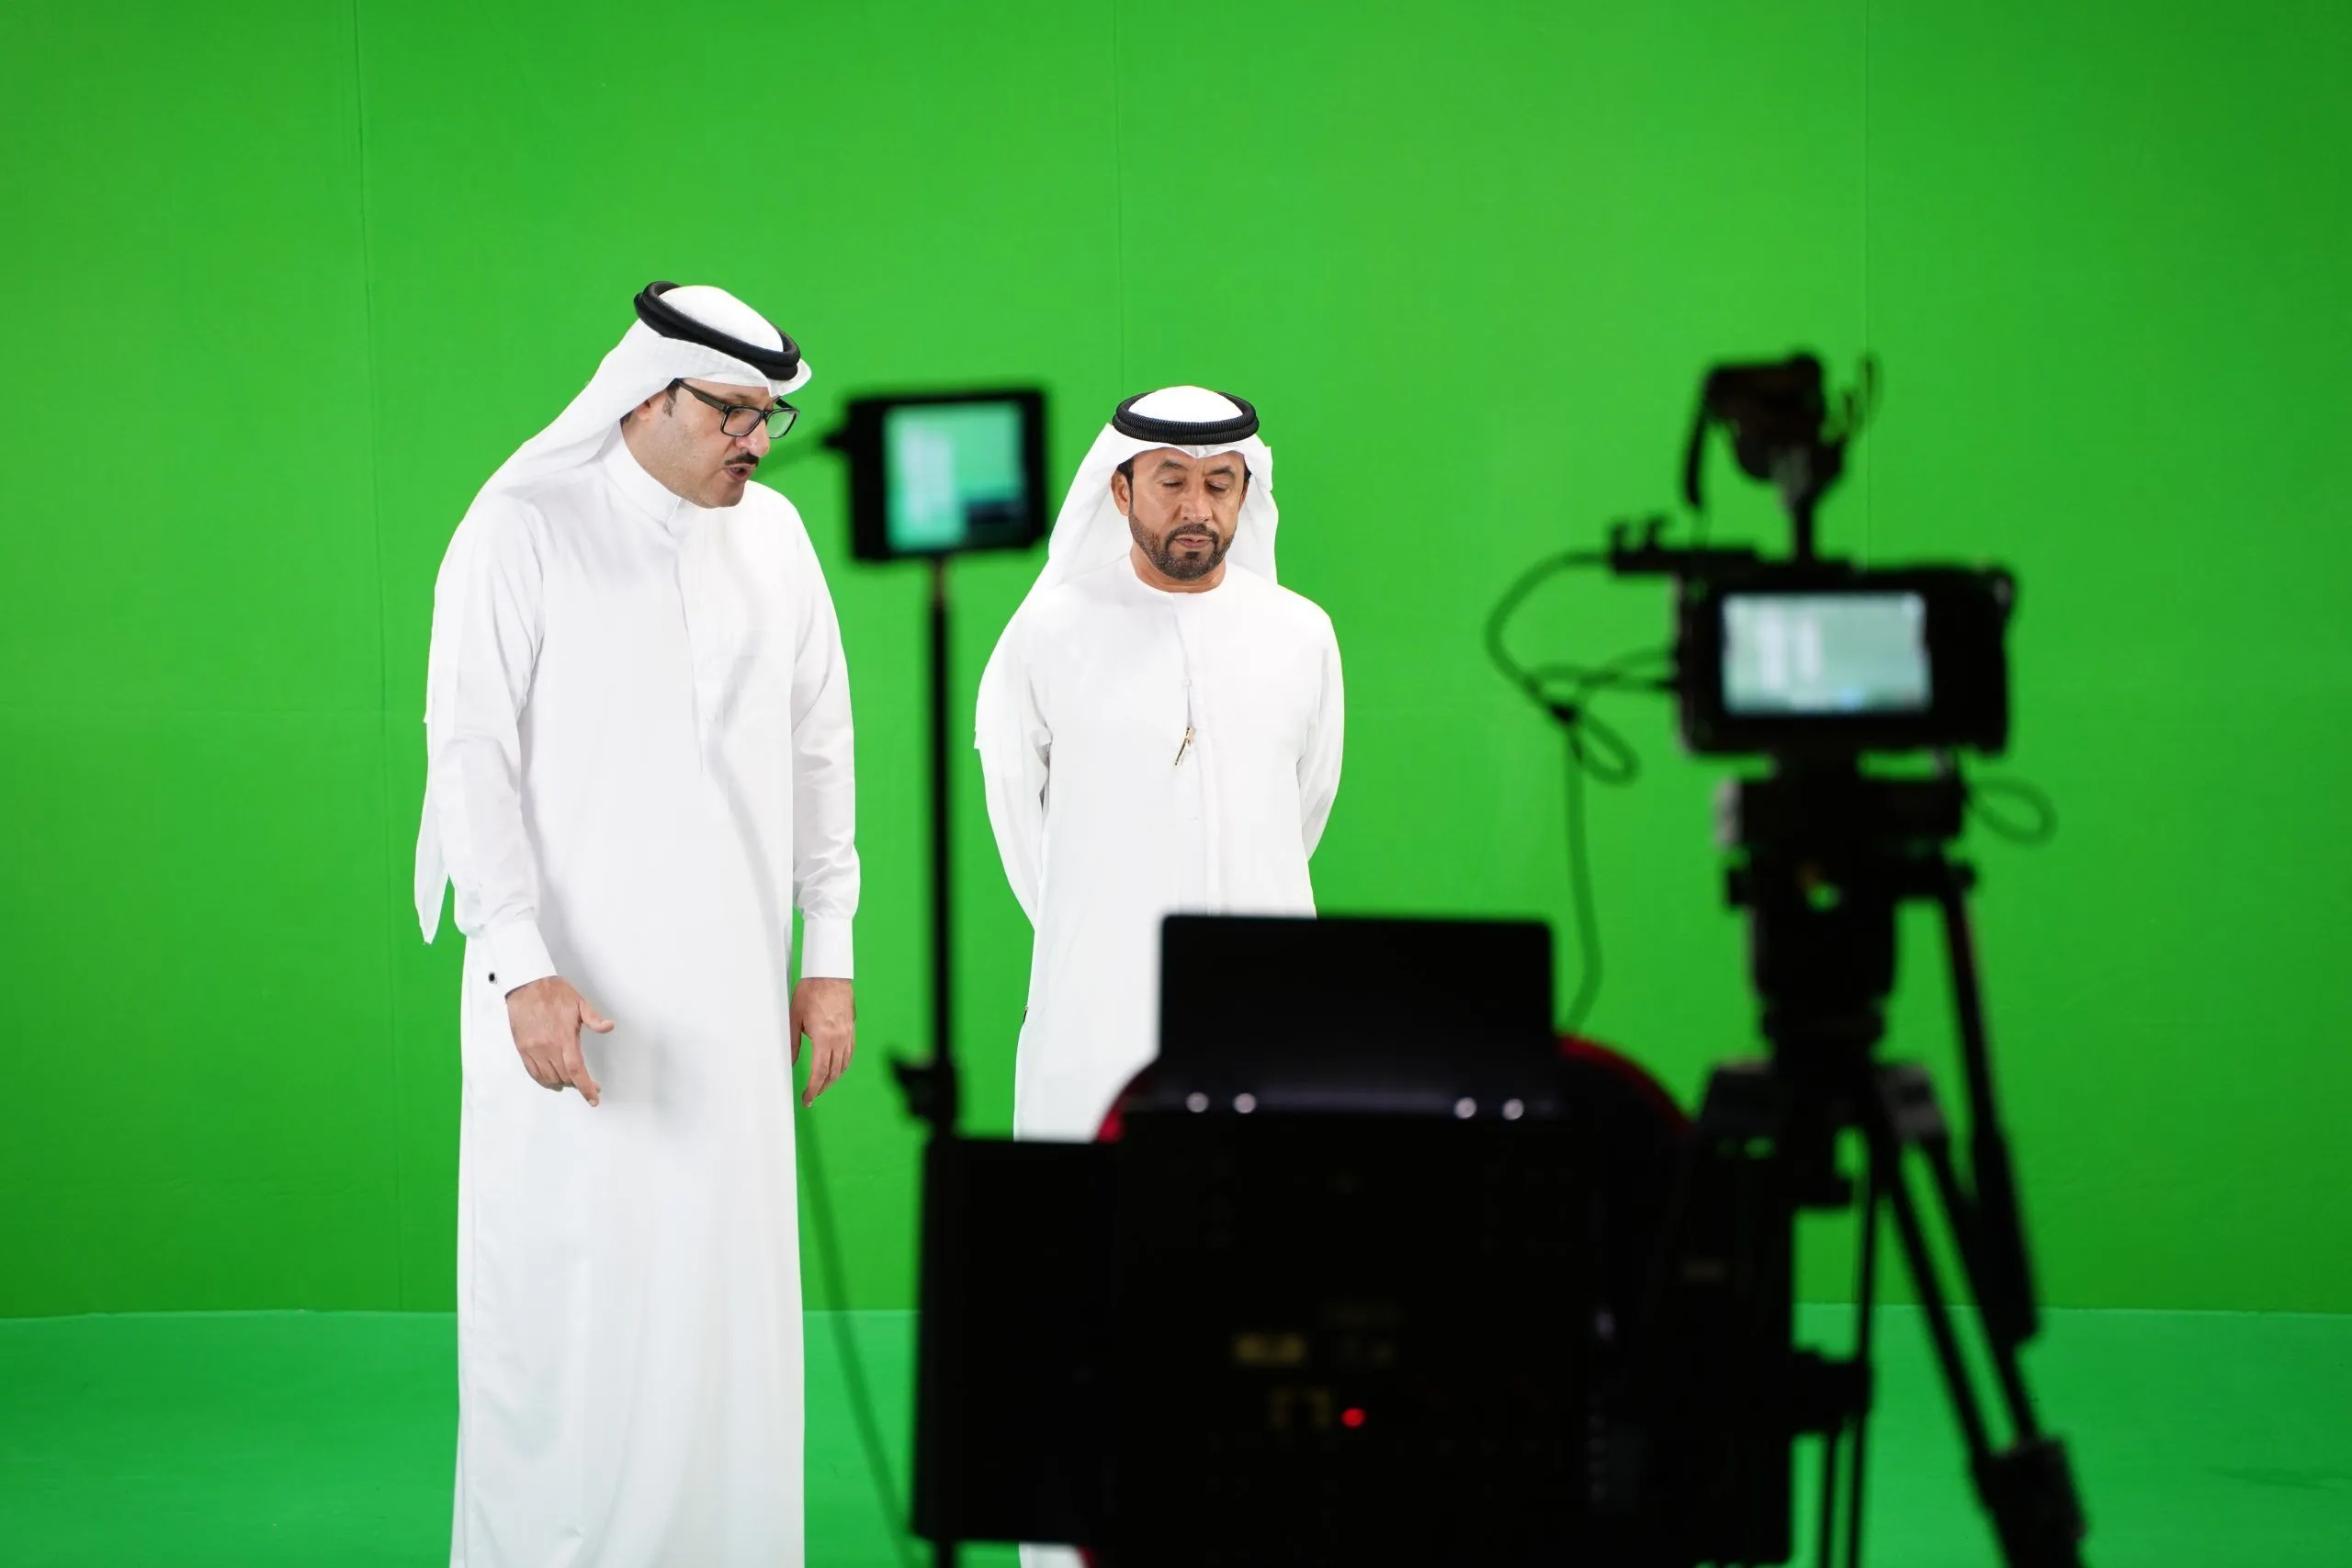 two men in white robes in front of a green screen